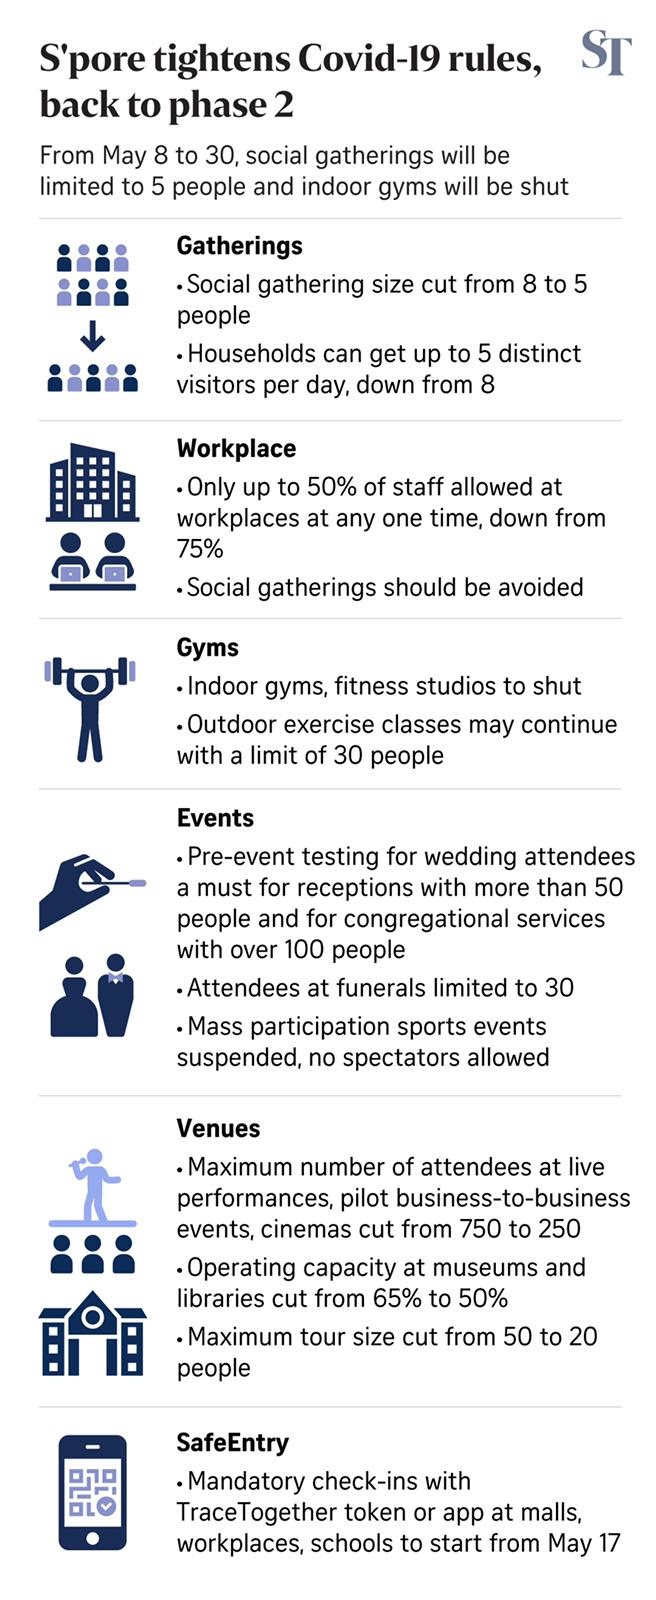 the straits times infographic on covid-19 phase 2 rules in singapore